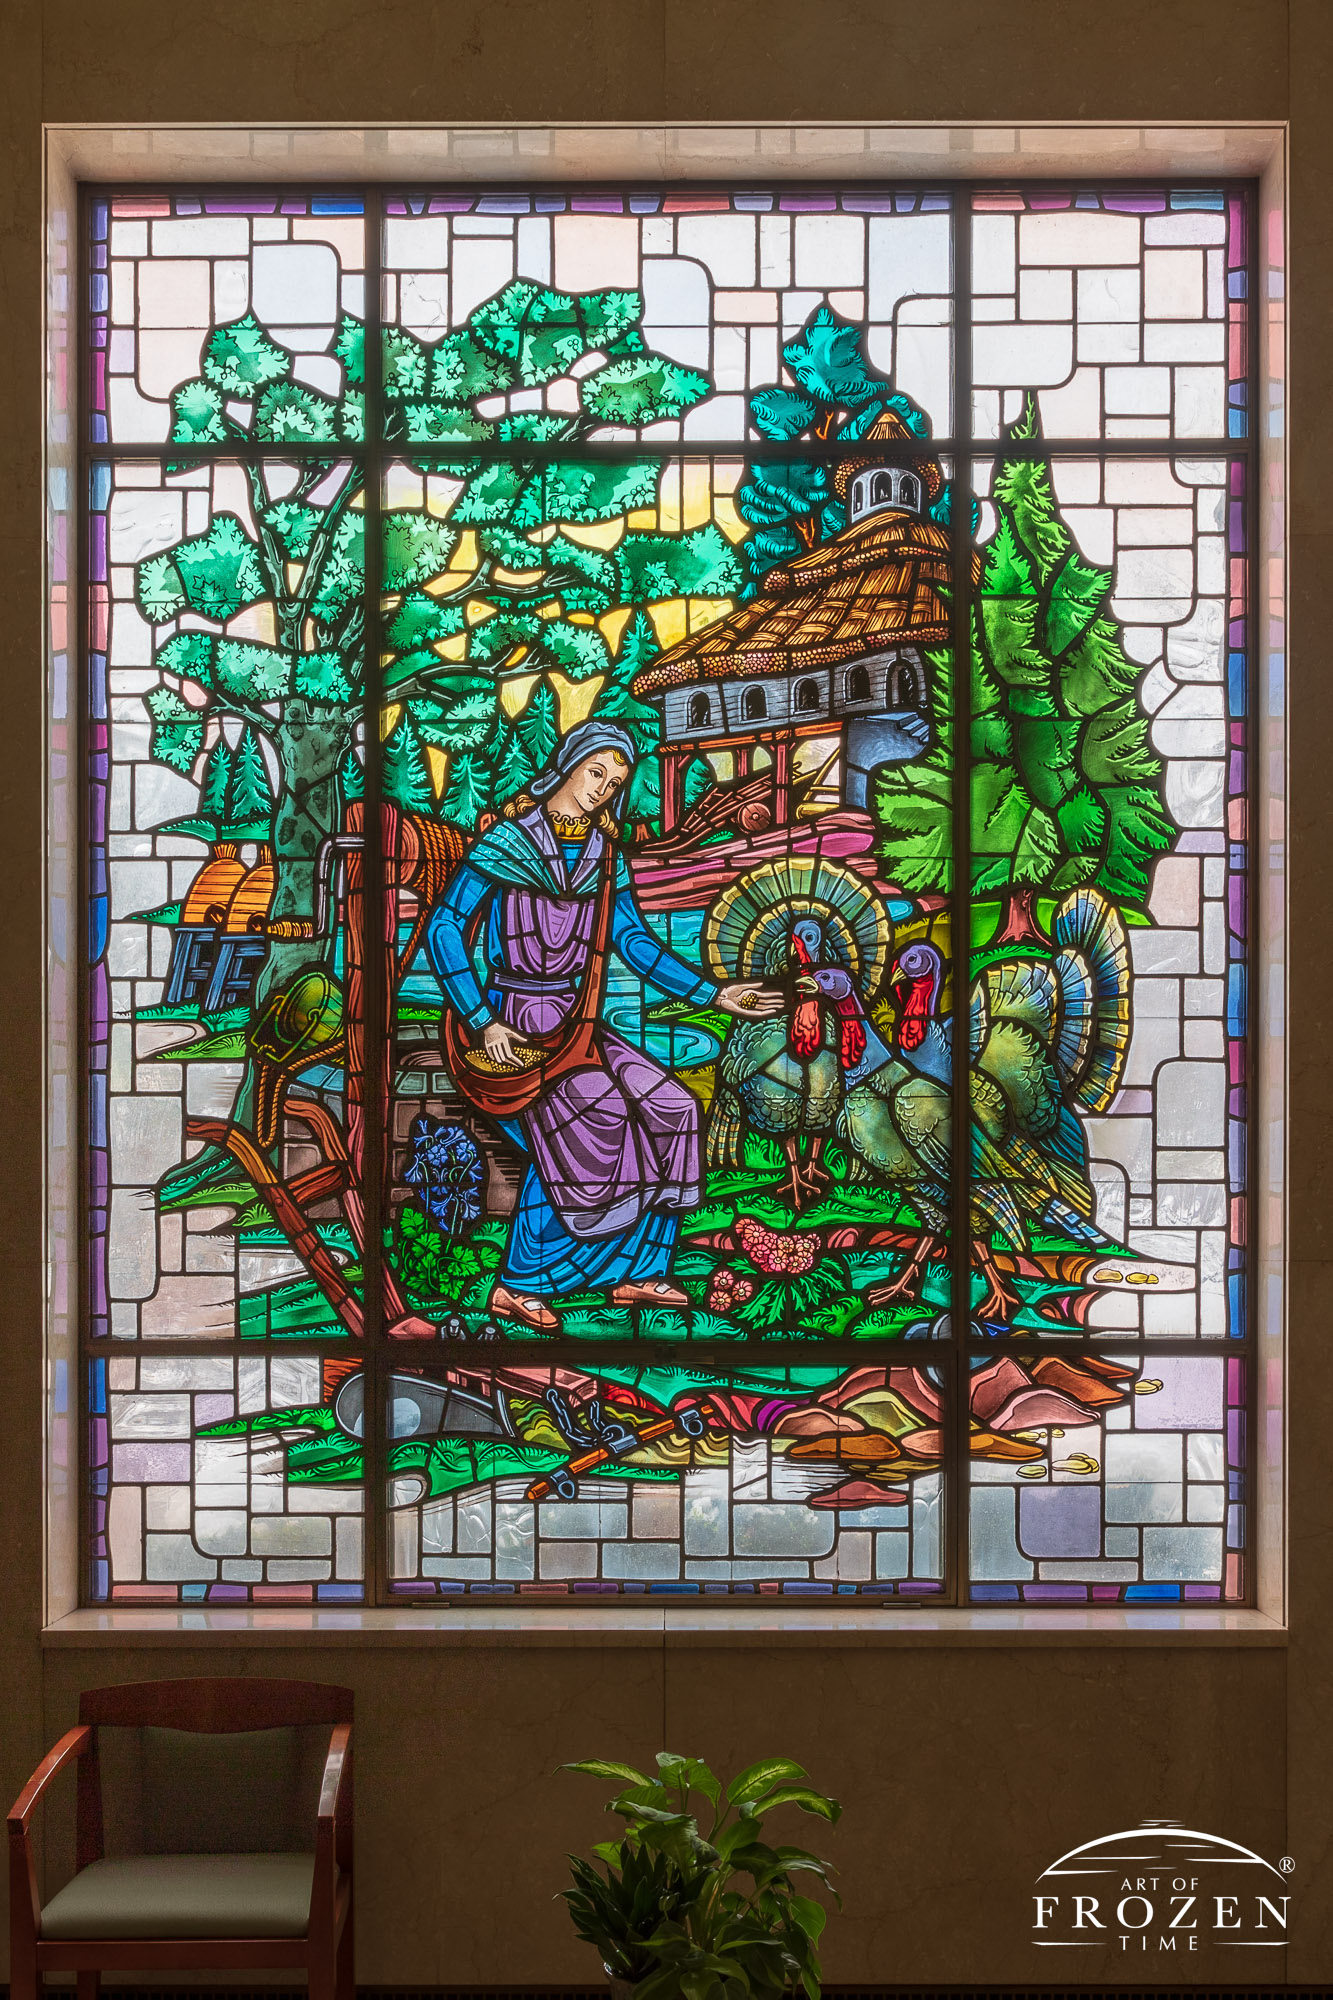 Historic stained-glass windows created by Louis Comfort Tiffany featuring his opalescent glass depicting a lady feeding a group of turkeys